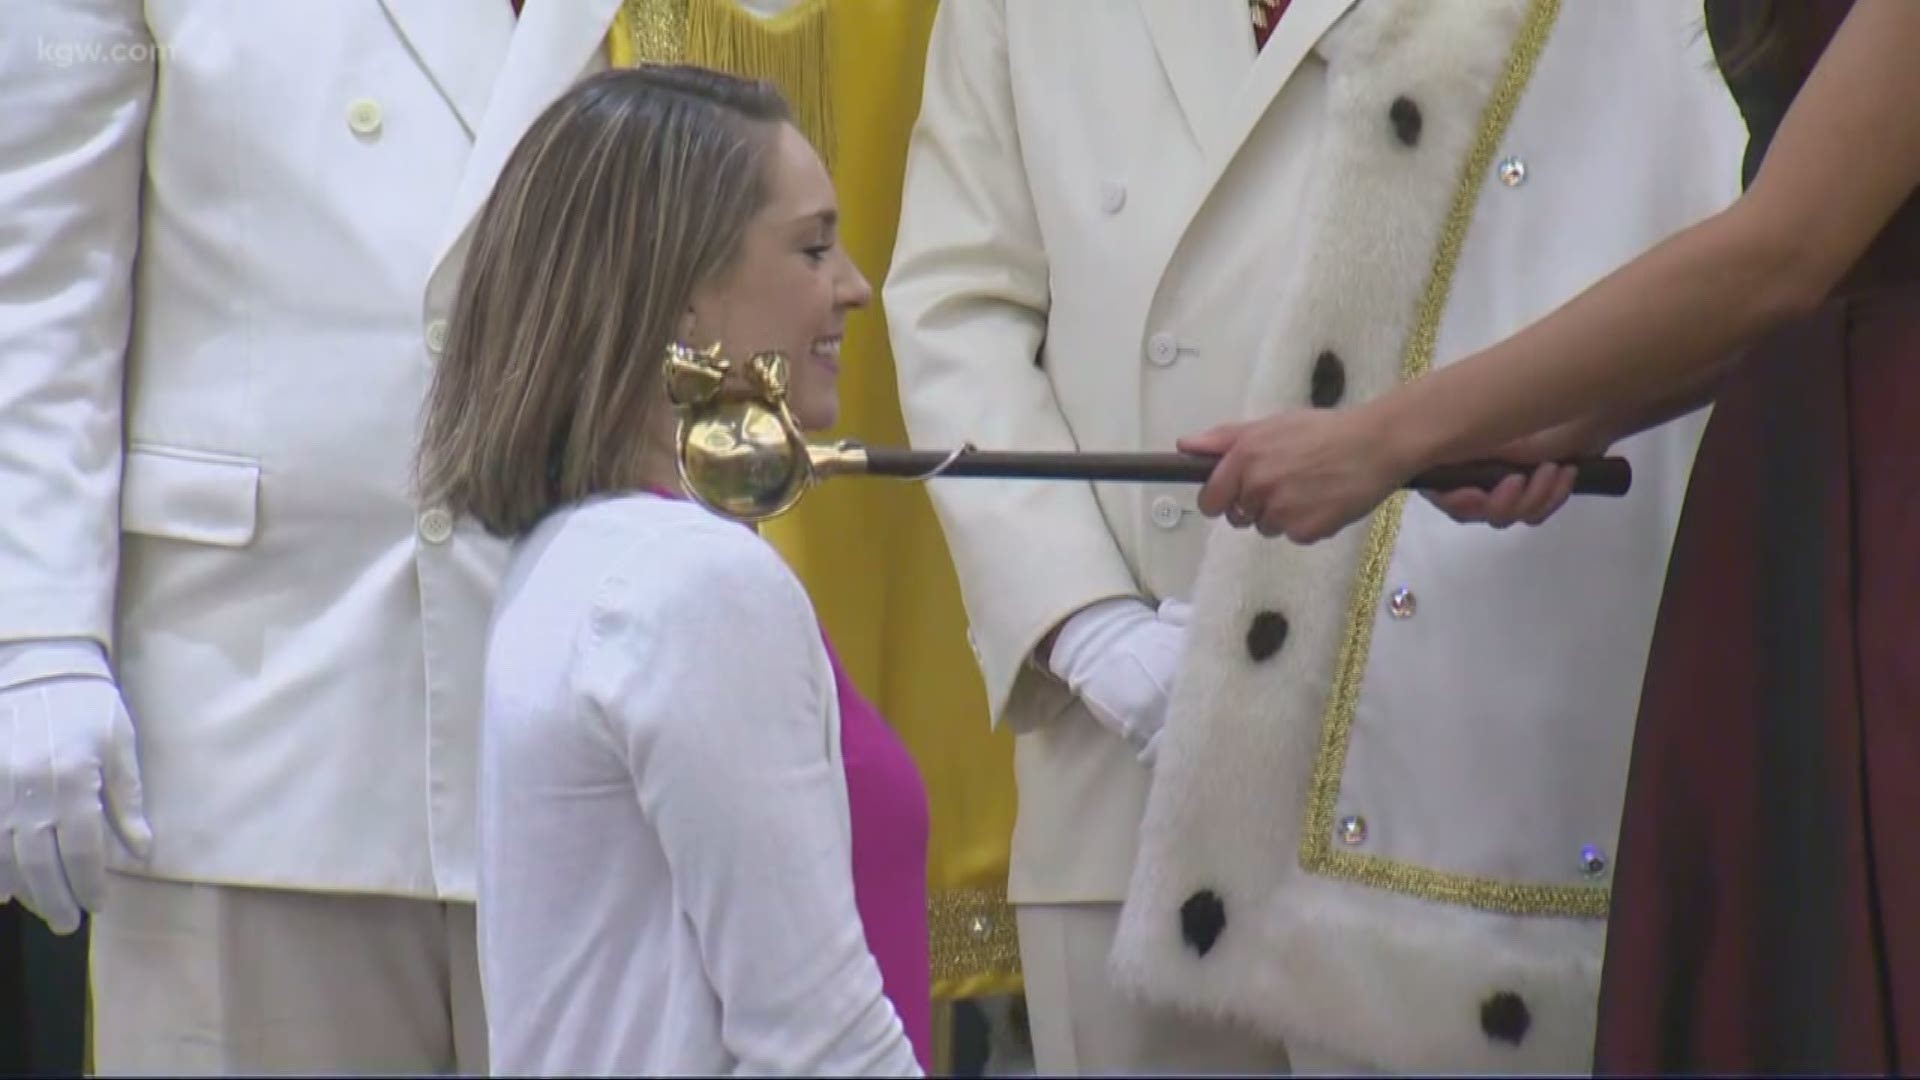 The Royal Rosarians are the official greeters and ambassadors of goodwill for the city of Portland. Today they hosted the honorary knighting ceremony, and two KGW anchors were among the knights and dames.